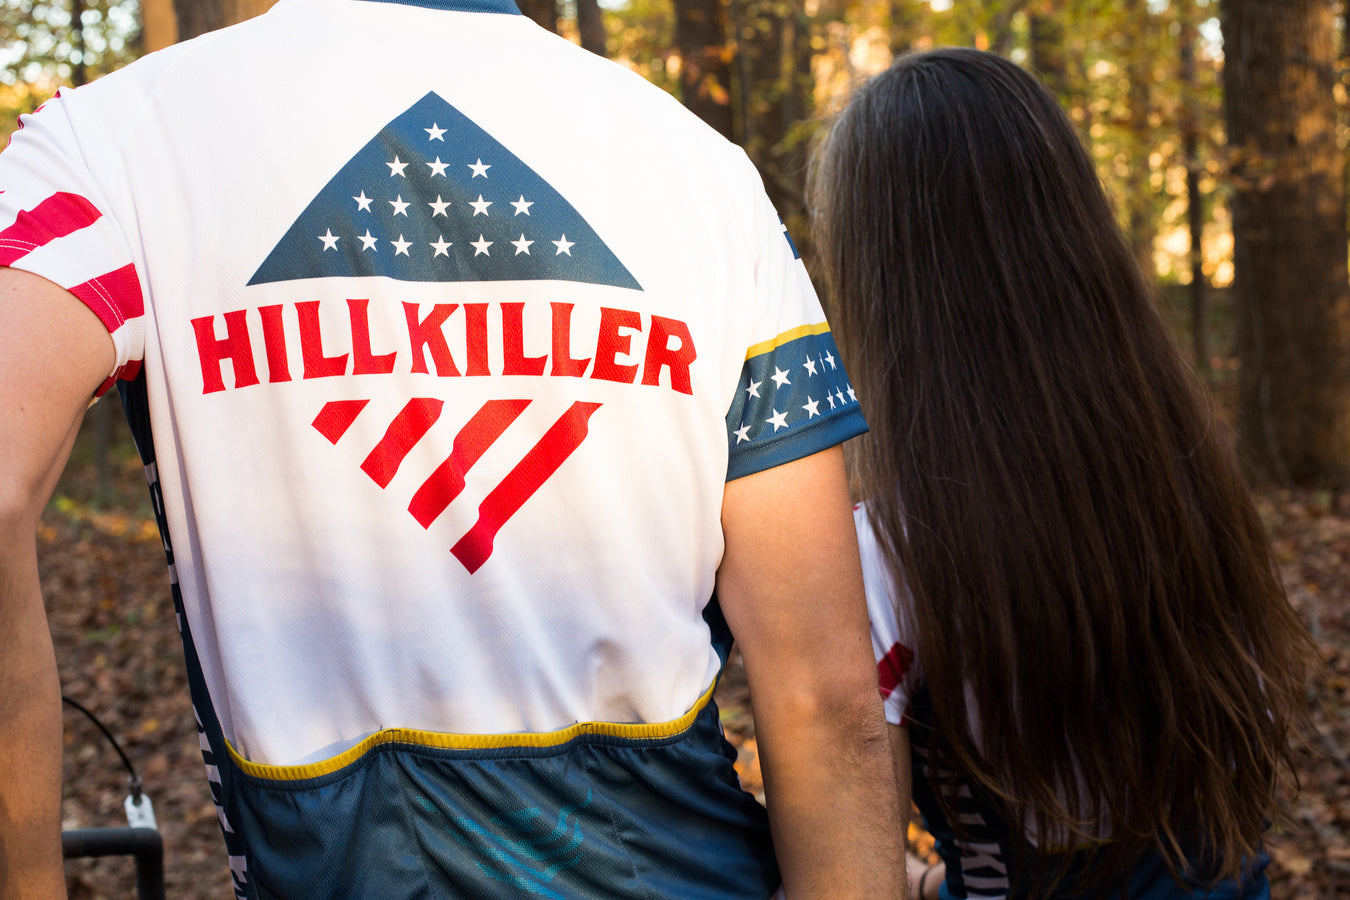 Entire collection — Hill Killer